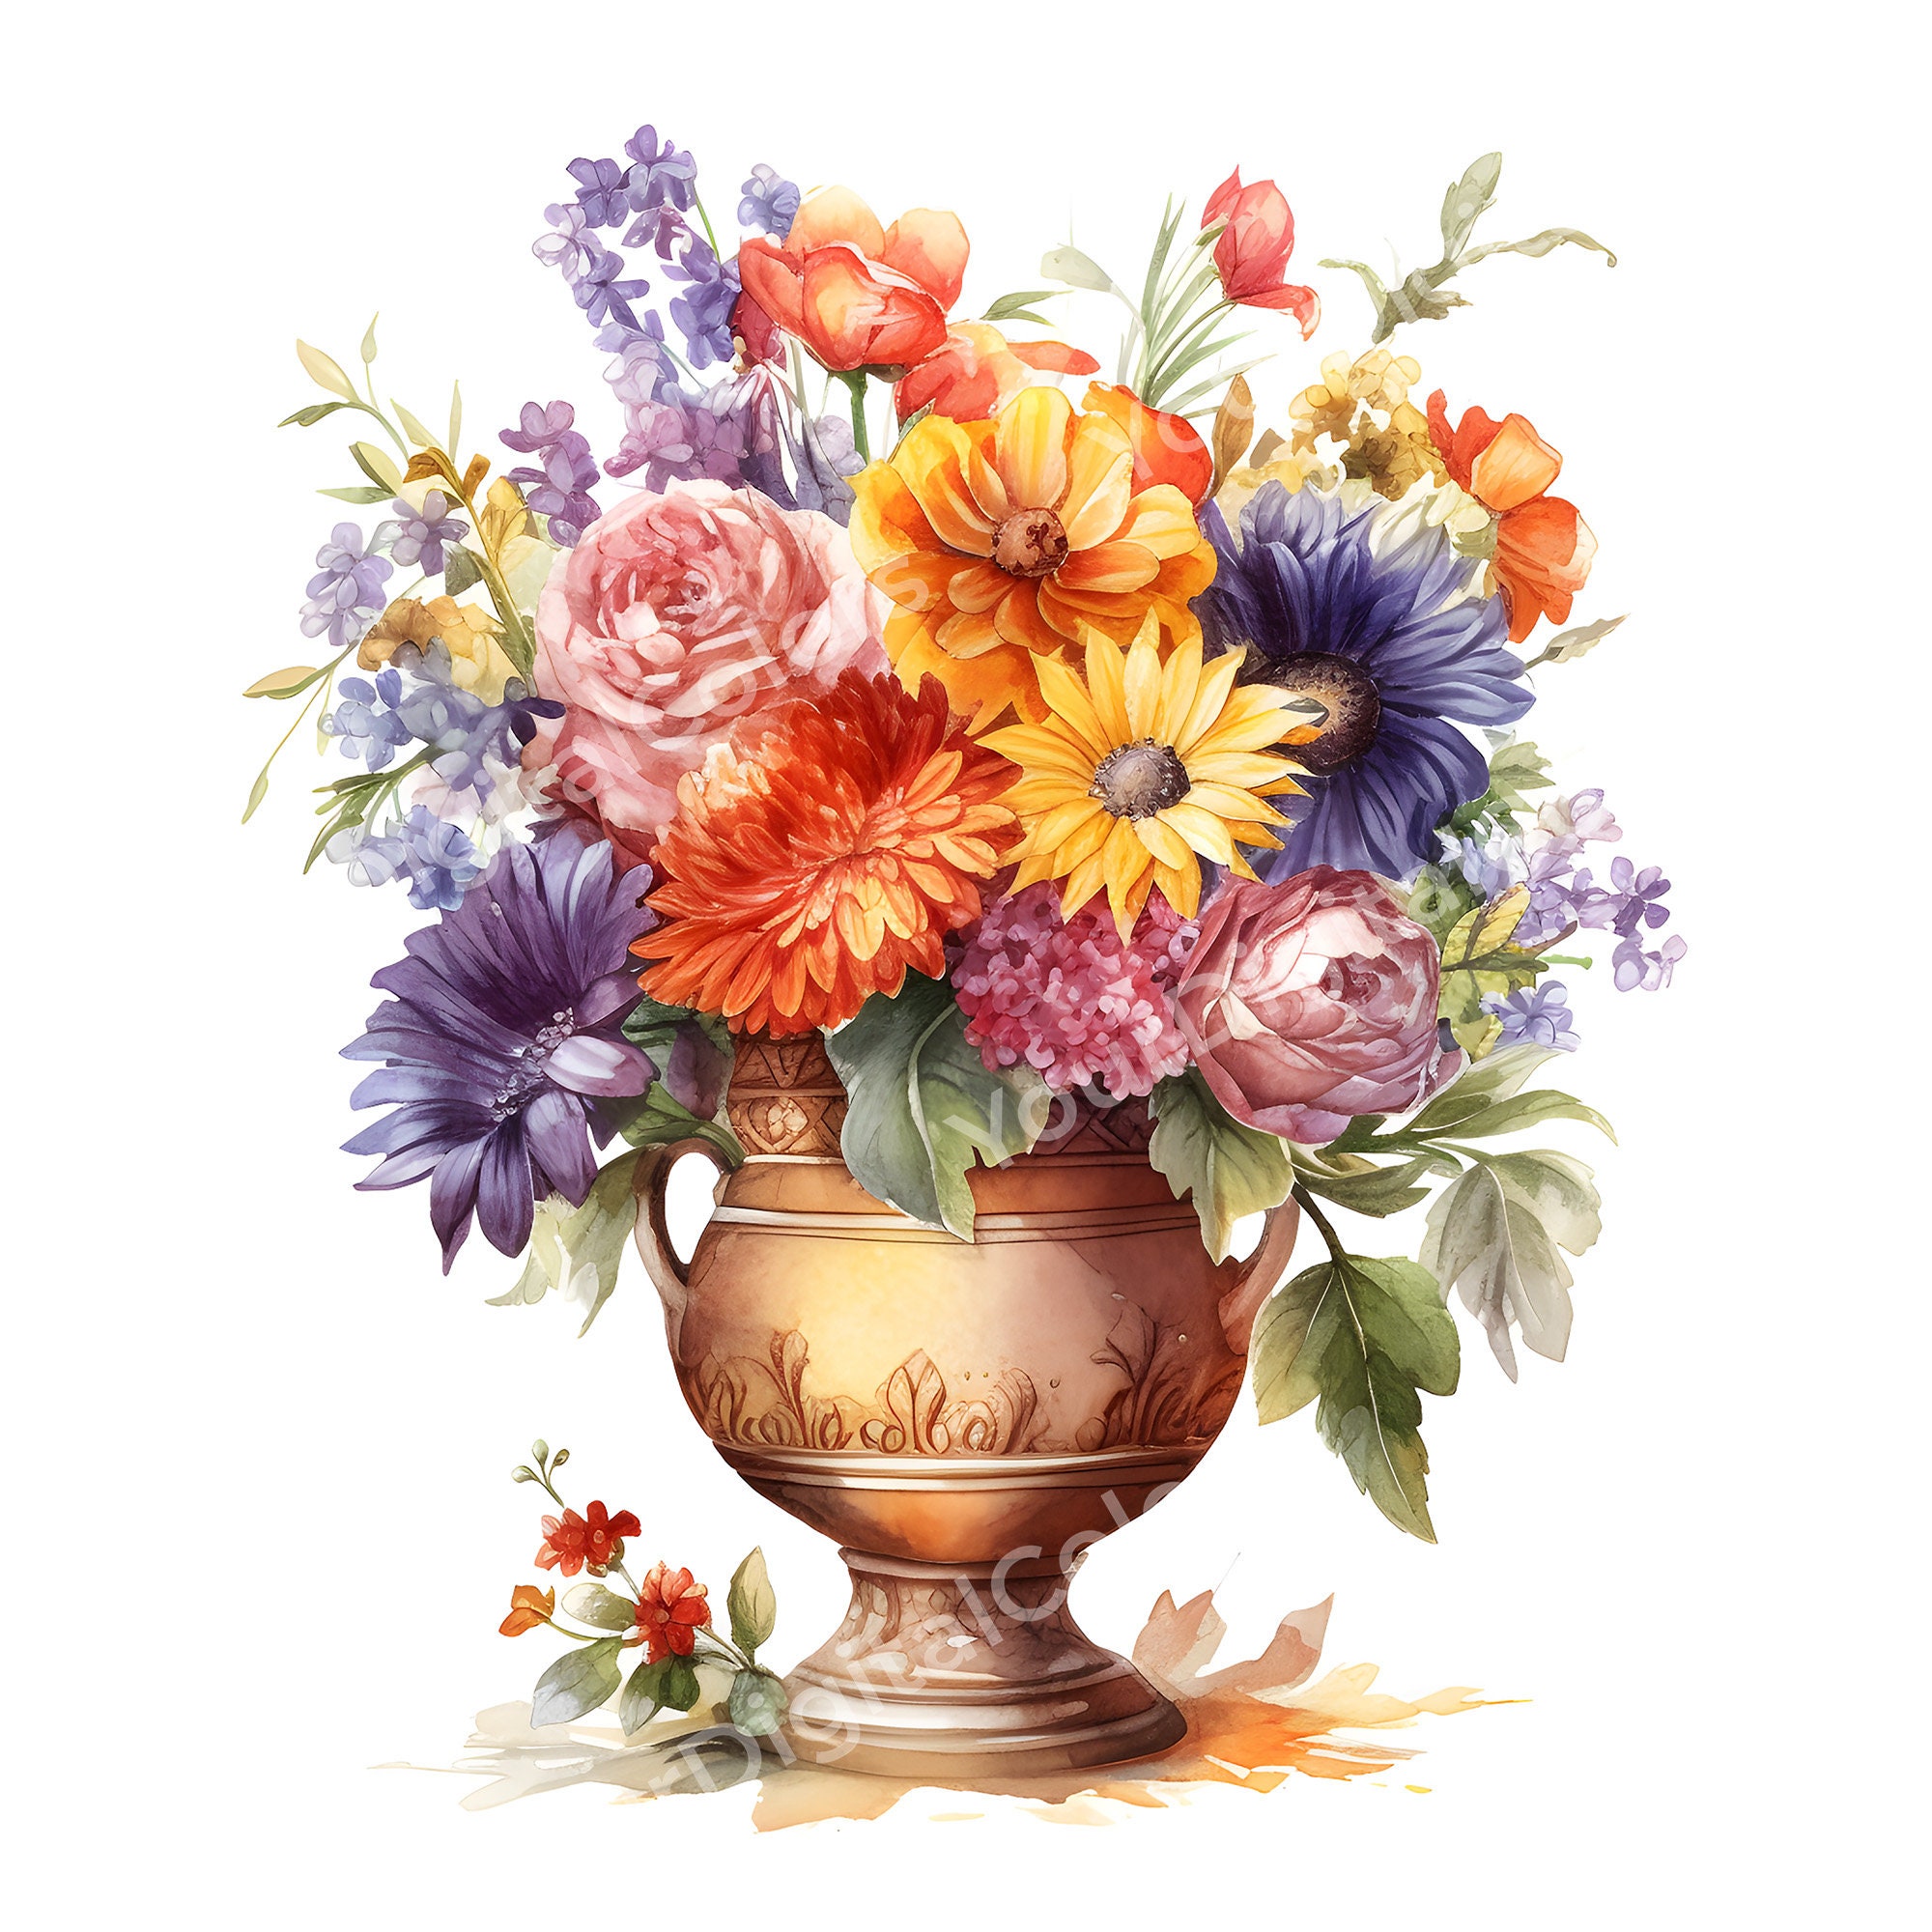 Flower Bouquet Clipart Bundle 12 High Quality vase With Flowers Jpgs ...